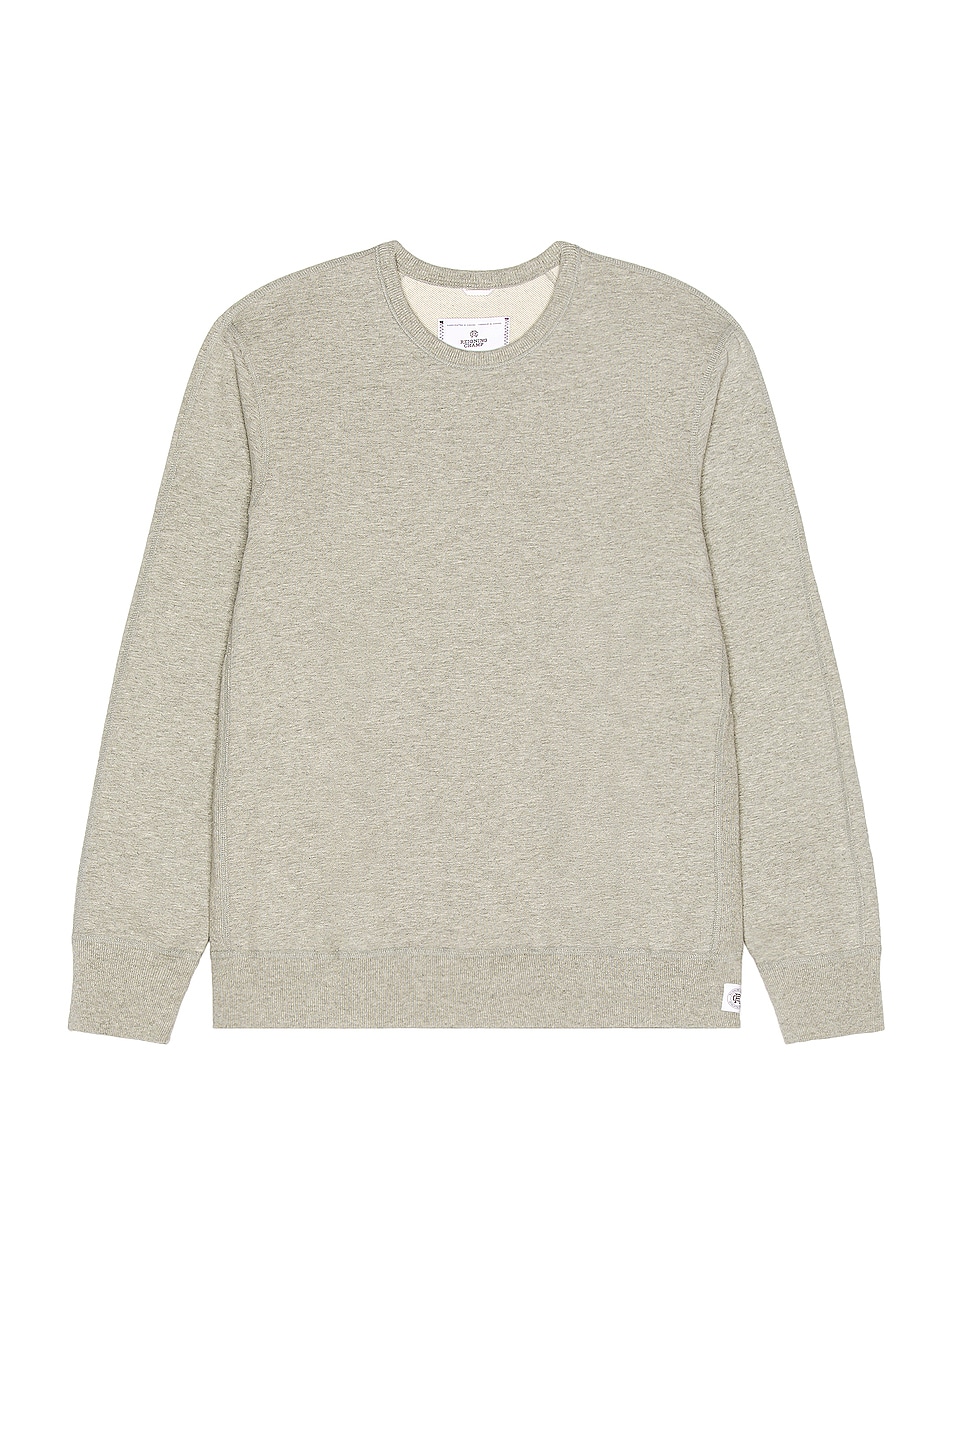 Image 1 of Reigning Champ Crewneck in Heather Grey